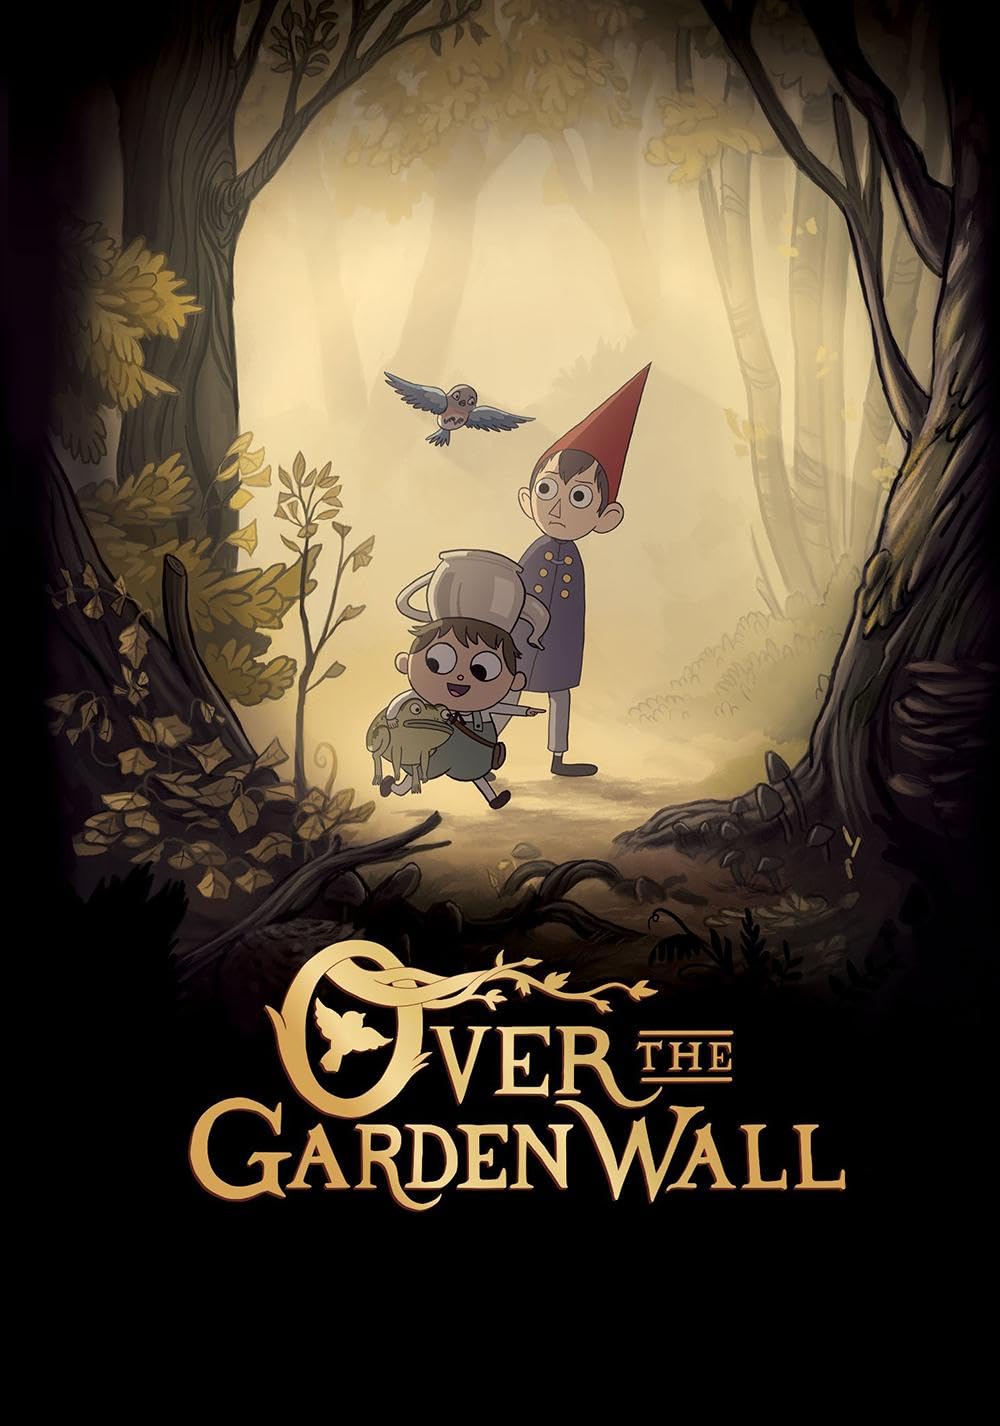 “Over the Garden Wall,” produced by Cartoon Network, is a cartoon miniseries that ran from Nov. 3-7, 2014. The show has become one of the most celebrated shows on Cartoon Network with its thick autumn atmosphere and storytelling. 